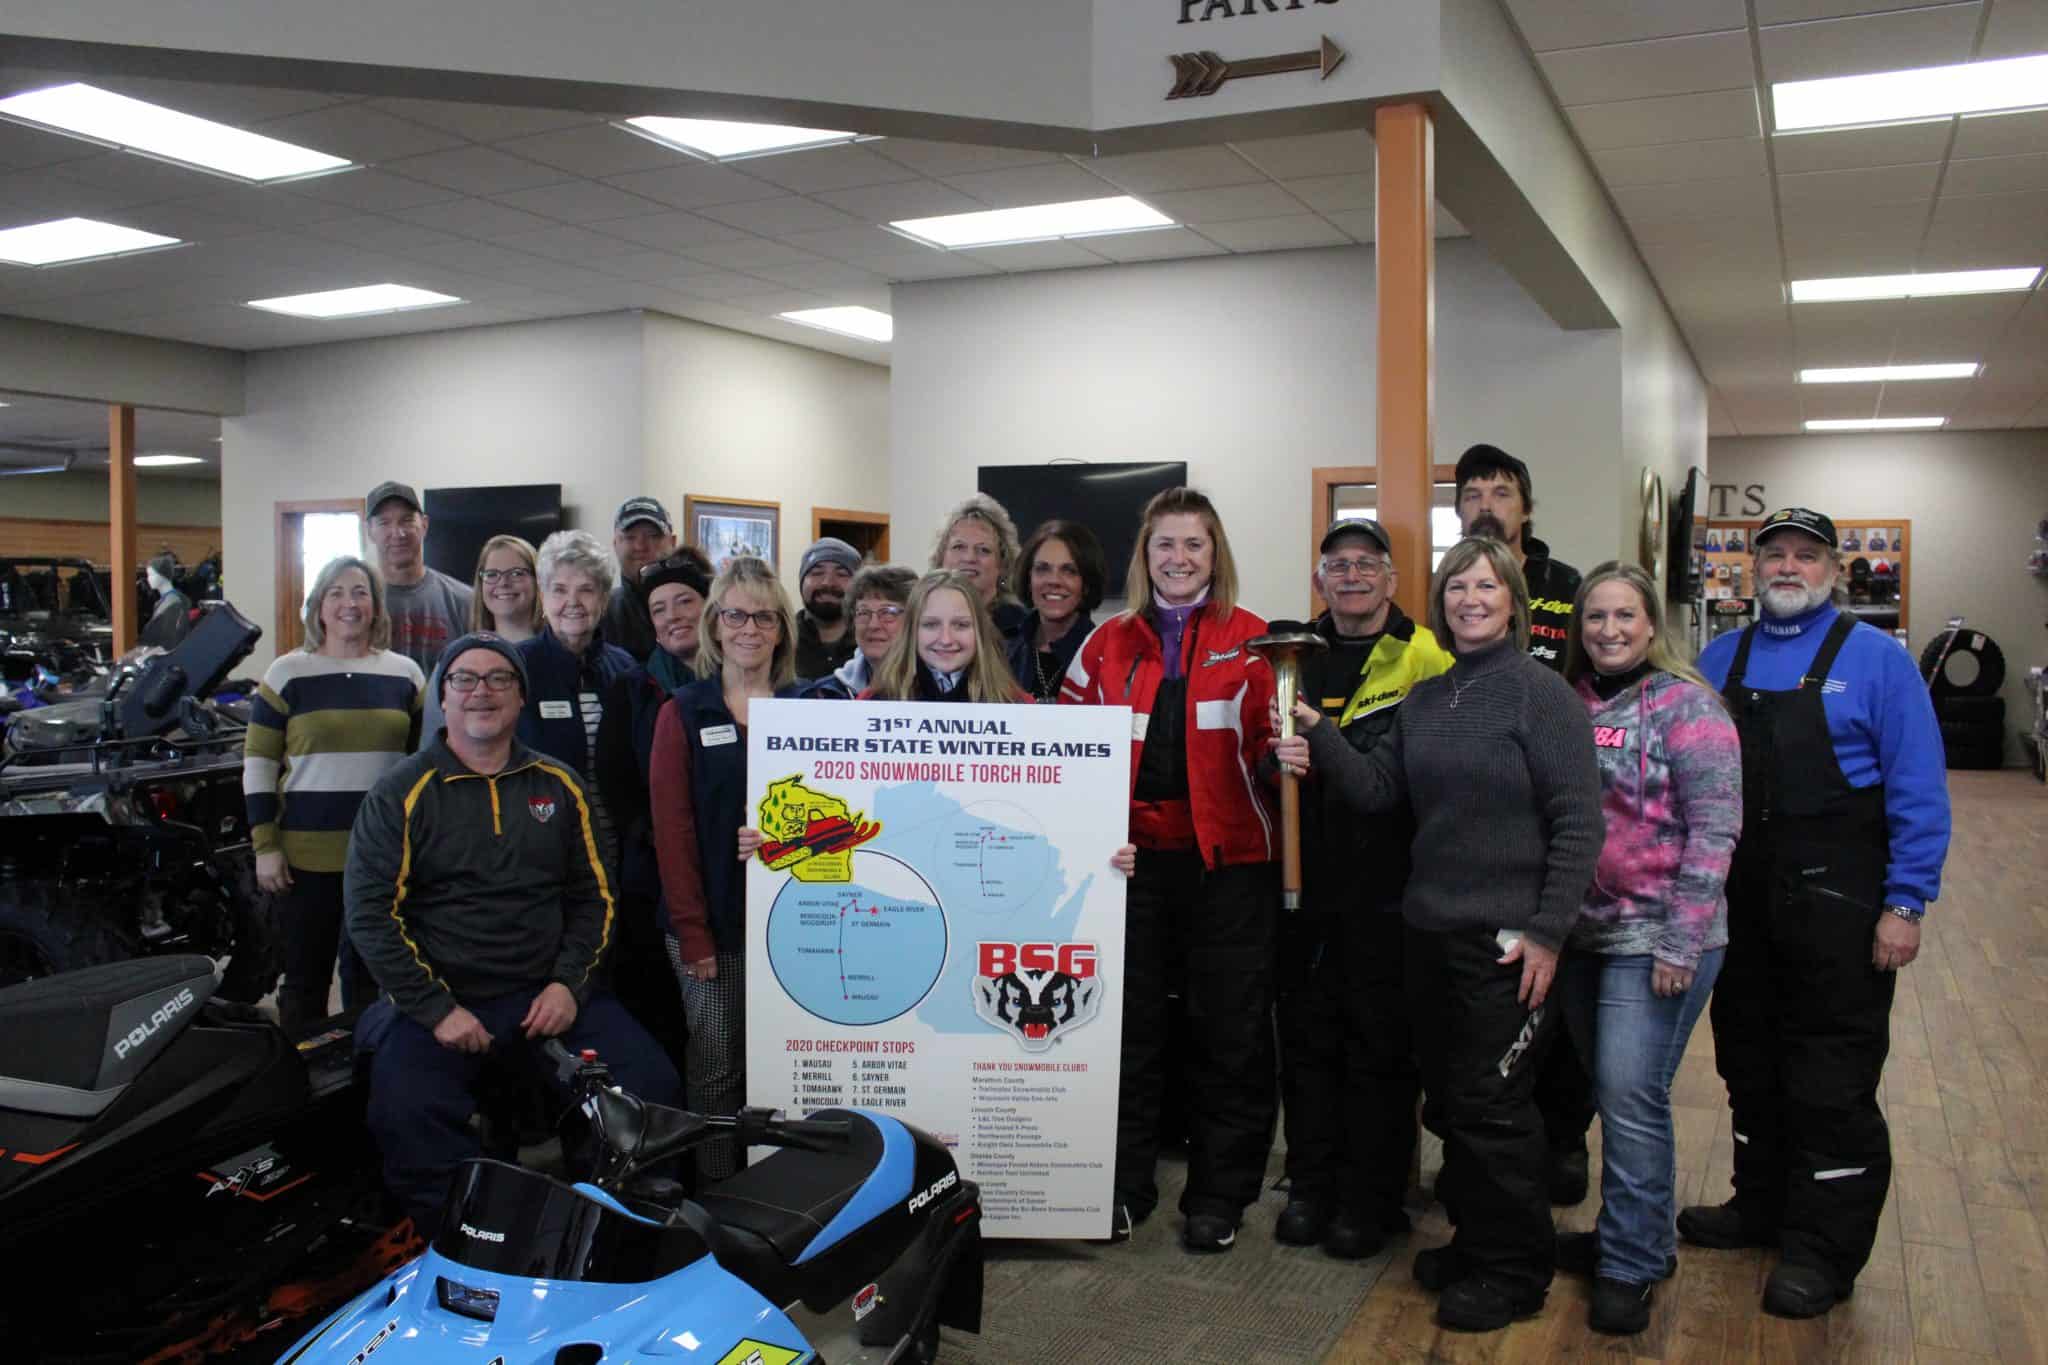 TORCH RUN MAKES STOP IN ERV’S ON WAY TO EAGLE RIVER